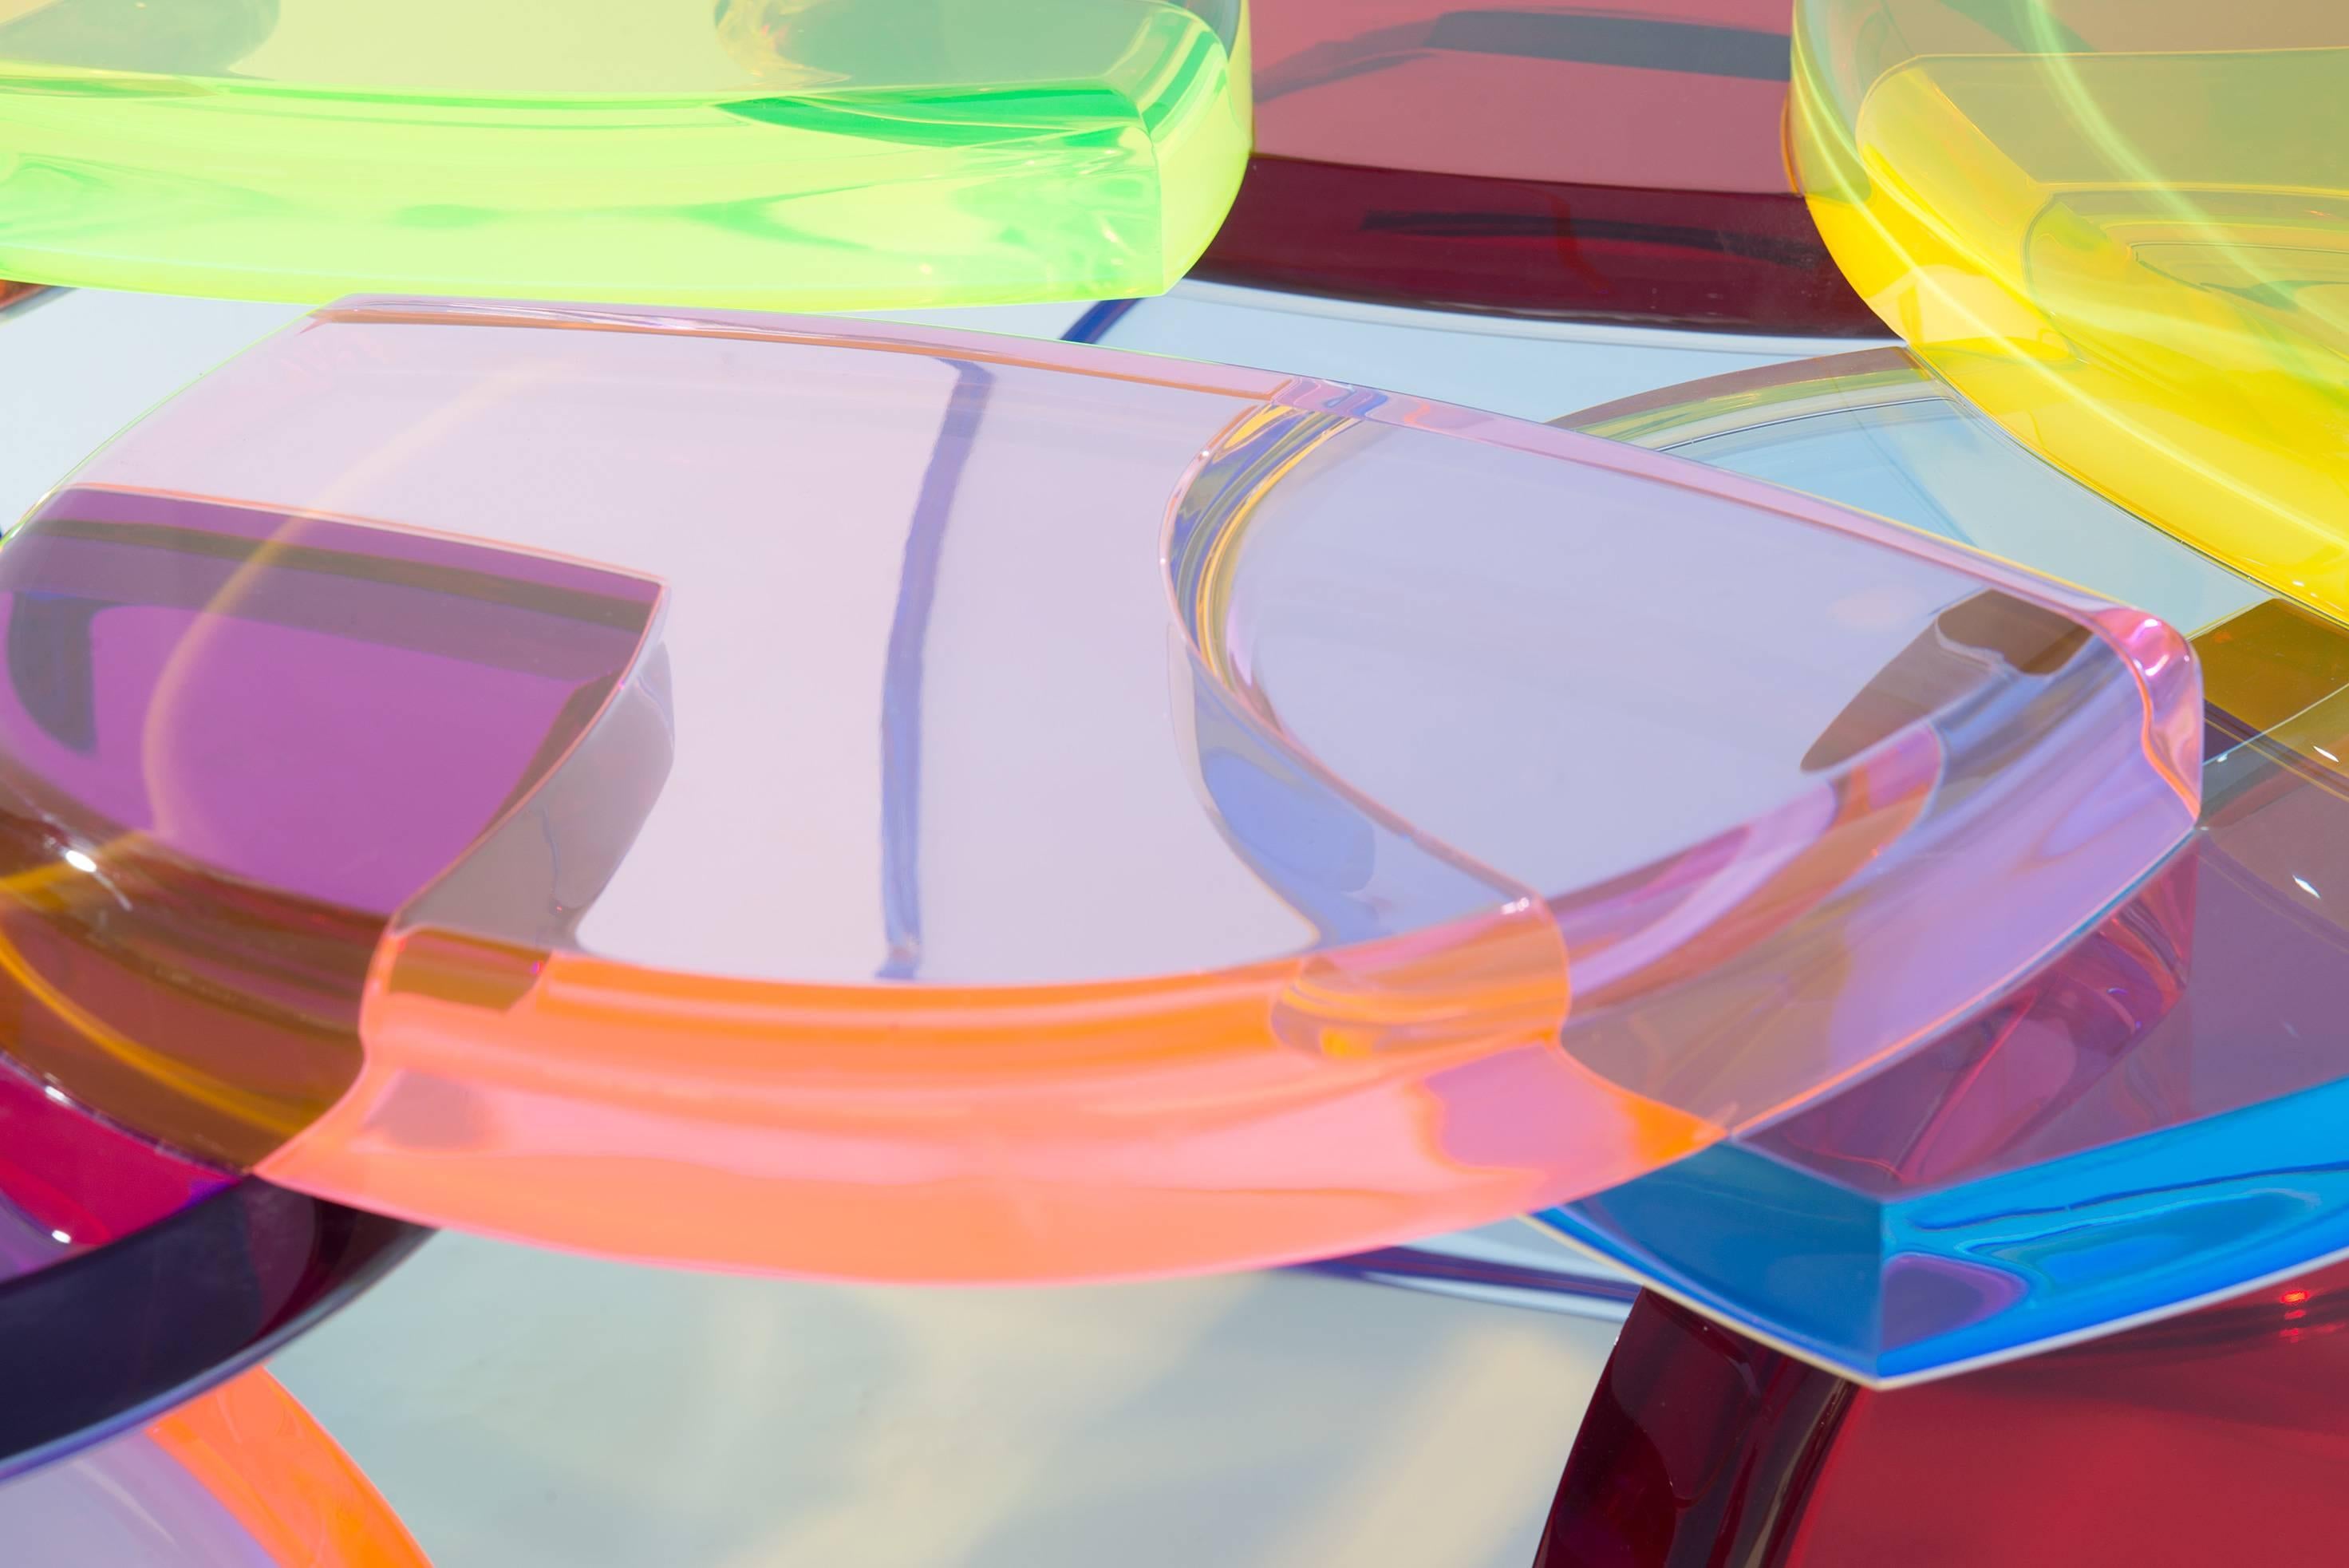 A beautiful coffee table with a structure of colored sequences of plexiglass modules that are repeated by building the shape.
A series of unique pieces designed and produced by Studio Superego.